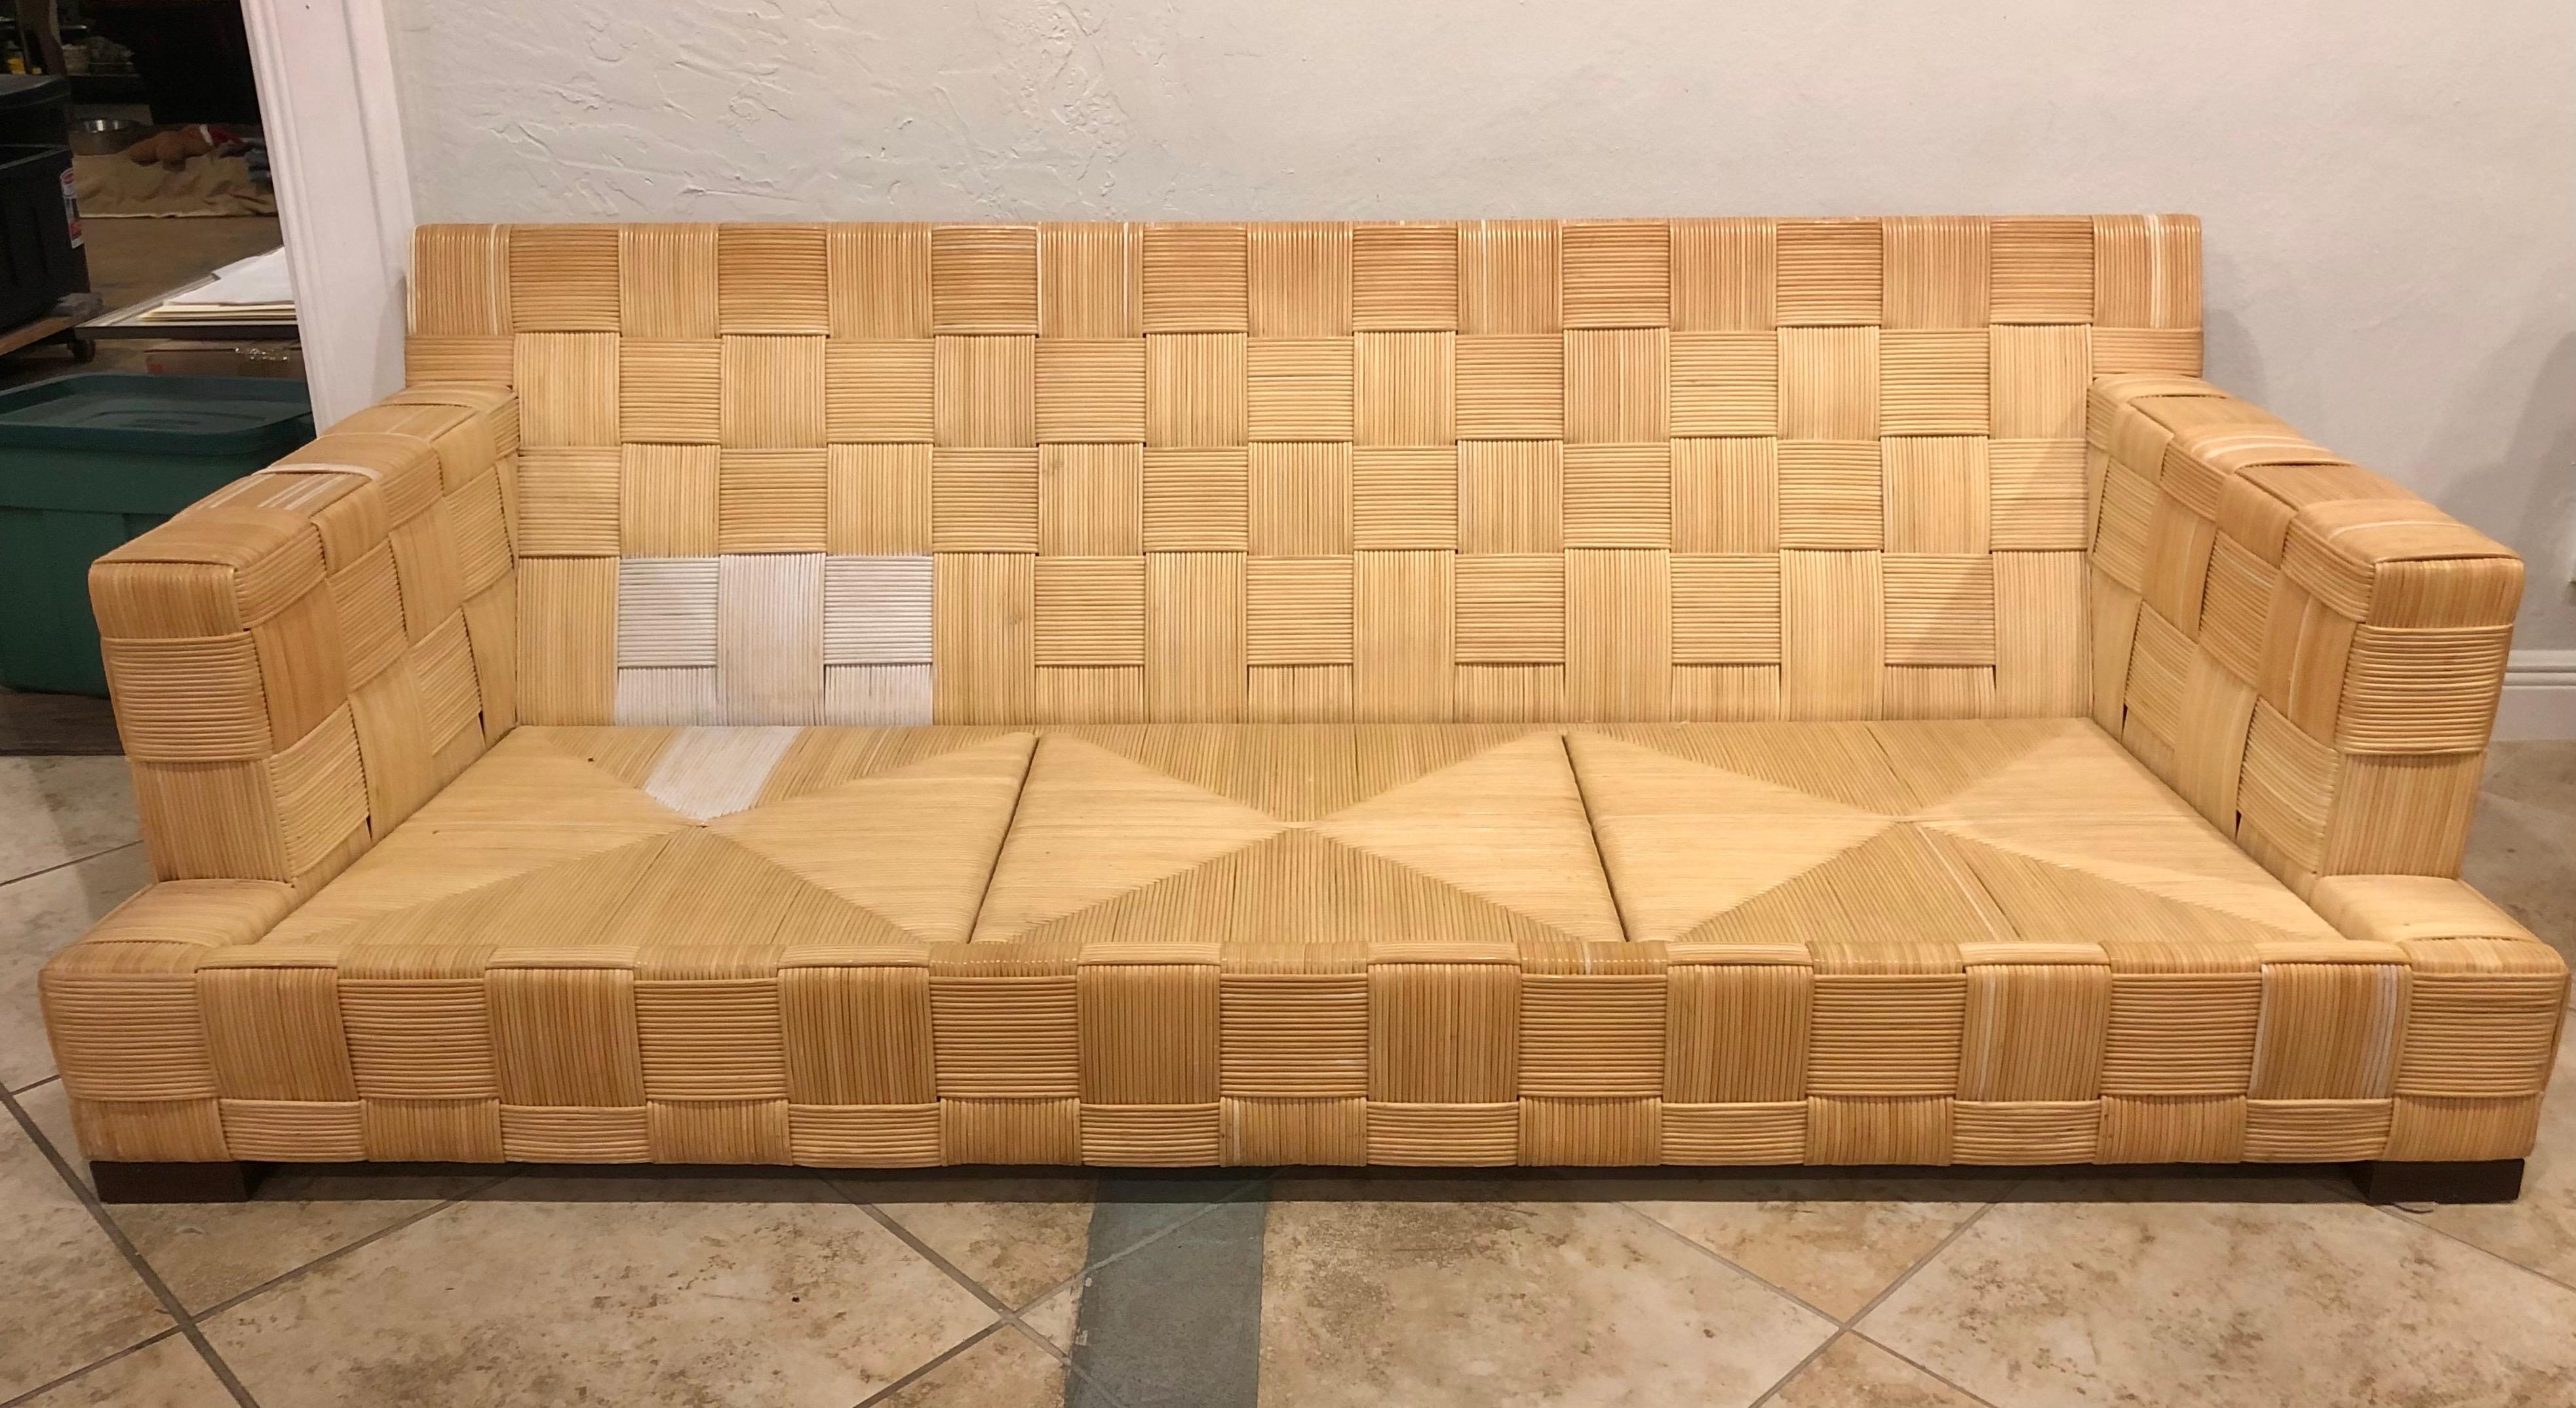 Donghia Block Island Collection sofa designed by John Hutton. Marked on bottom. Mahogany frame construction with stained mahogany accents. Very good condition.